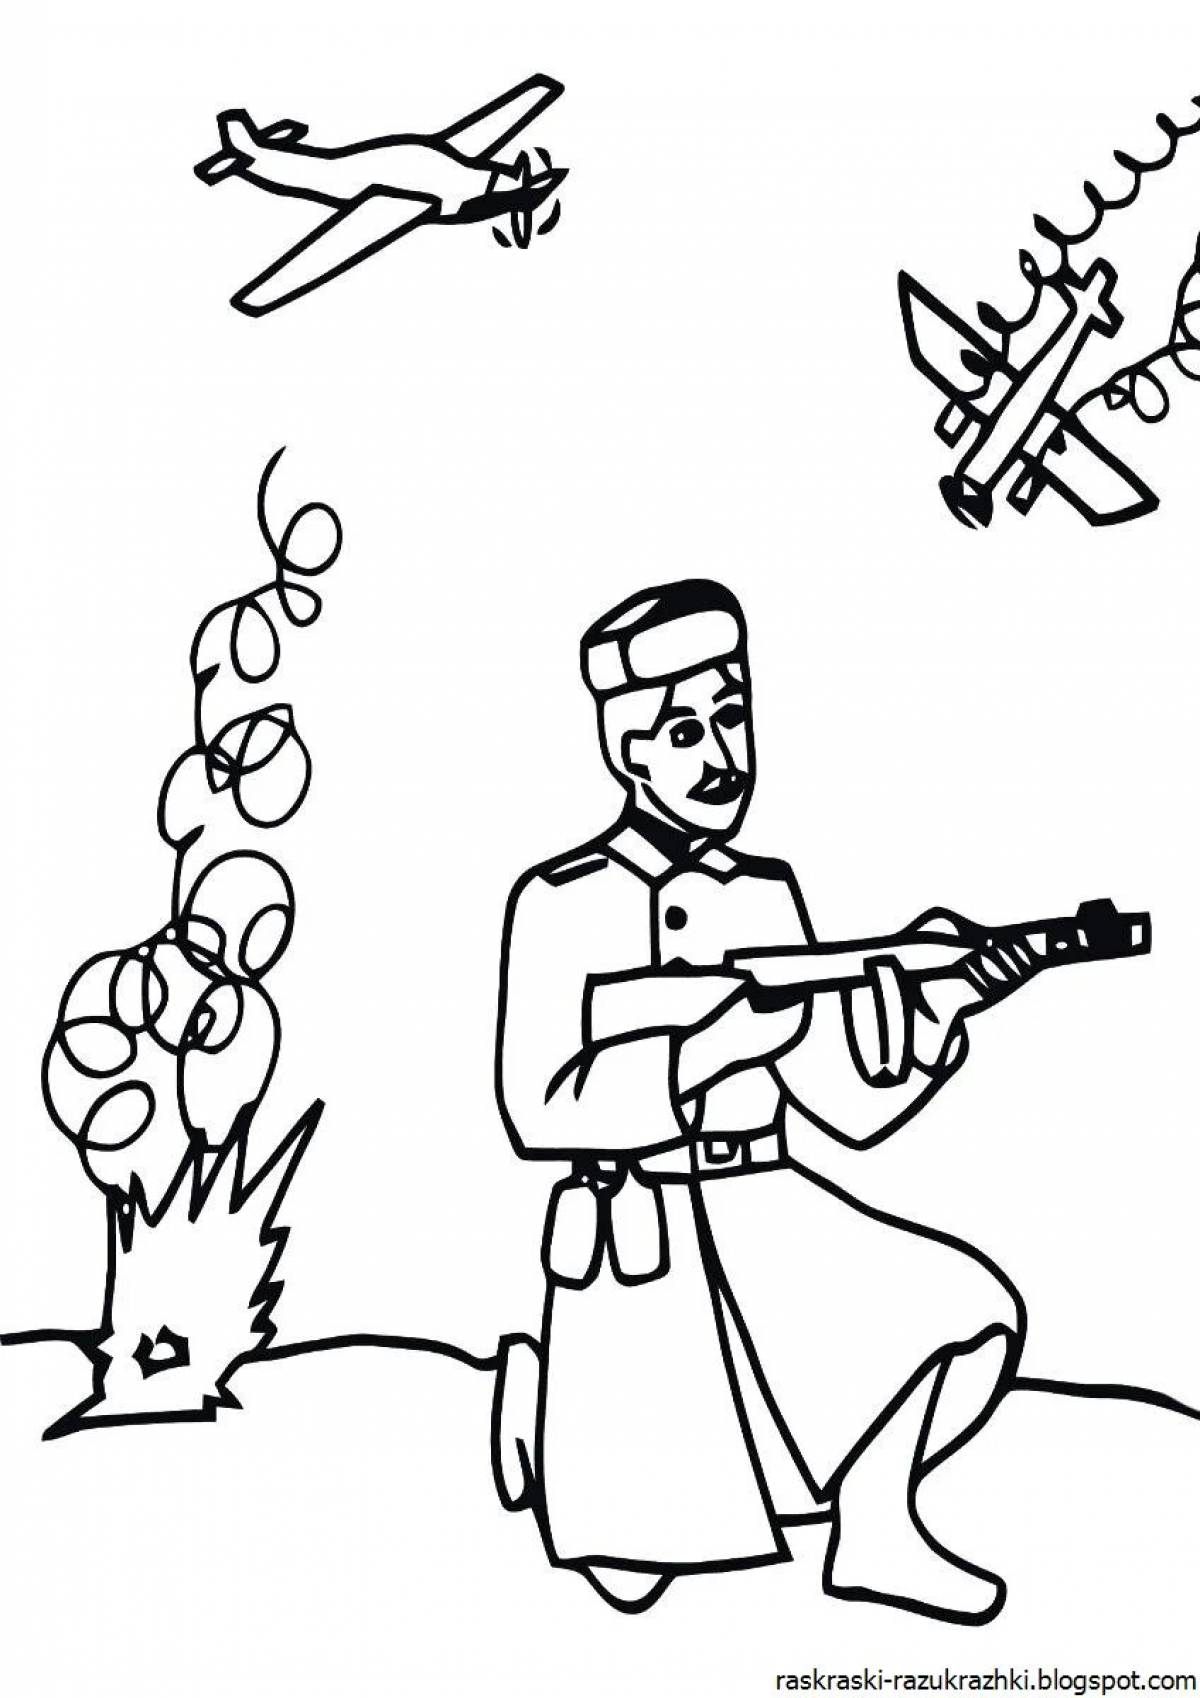 Dynamic children's military drawing